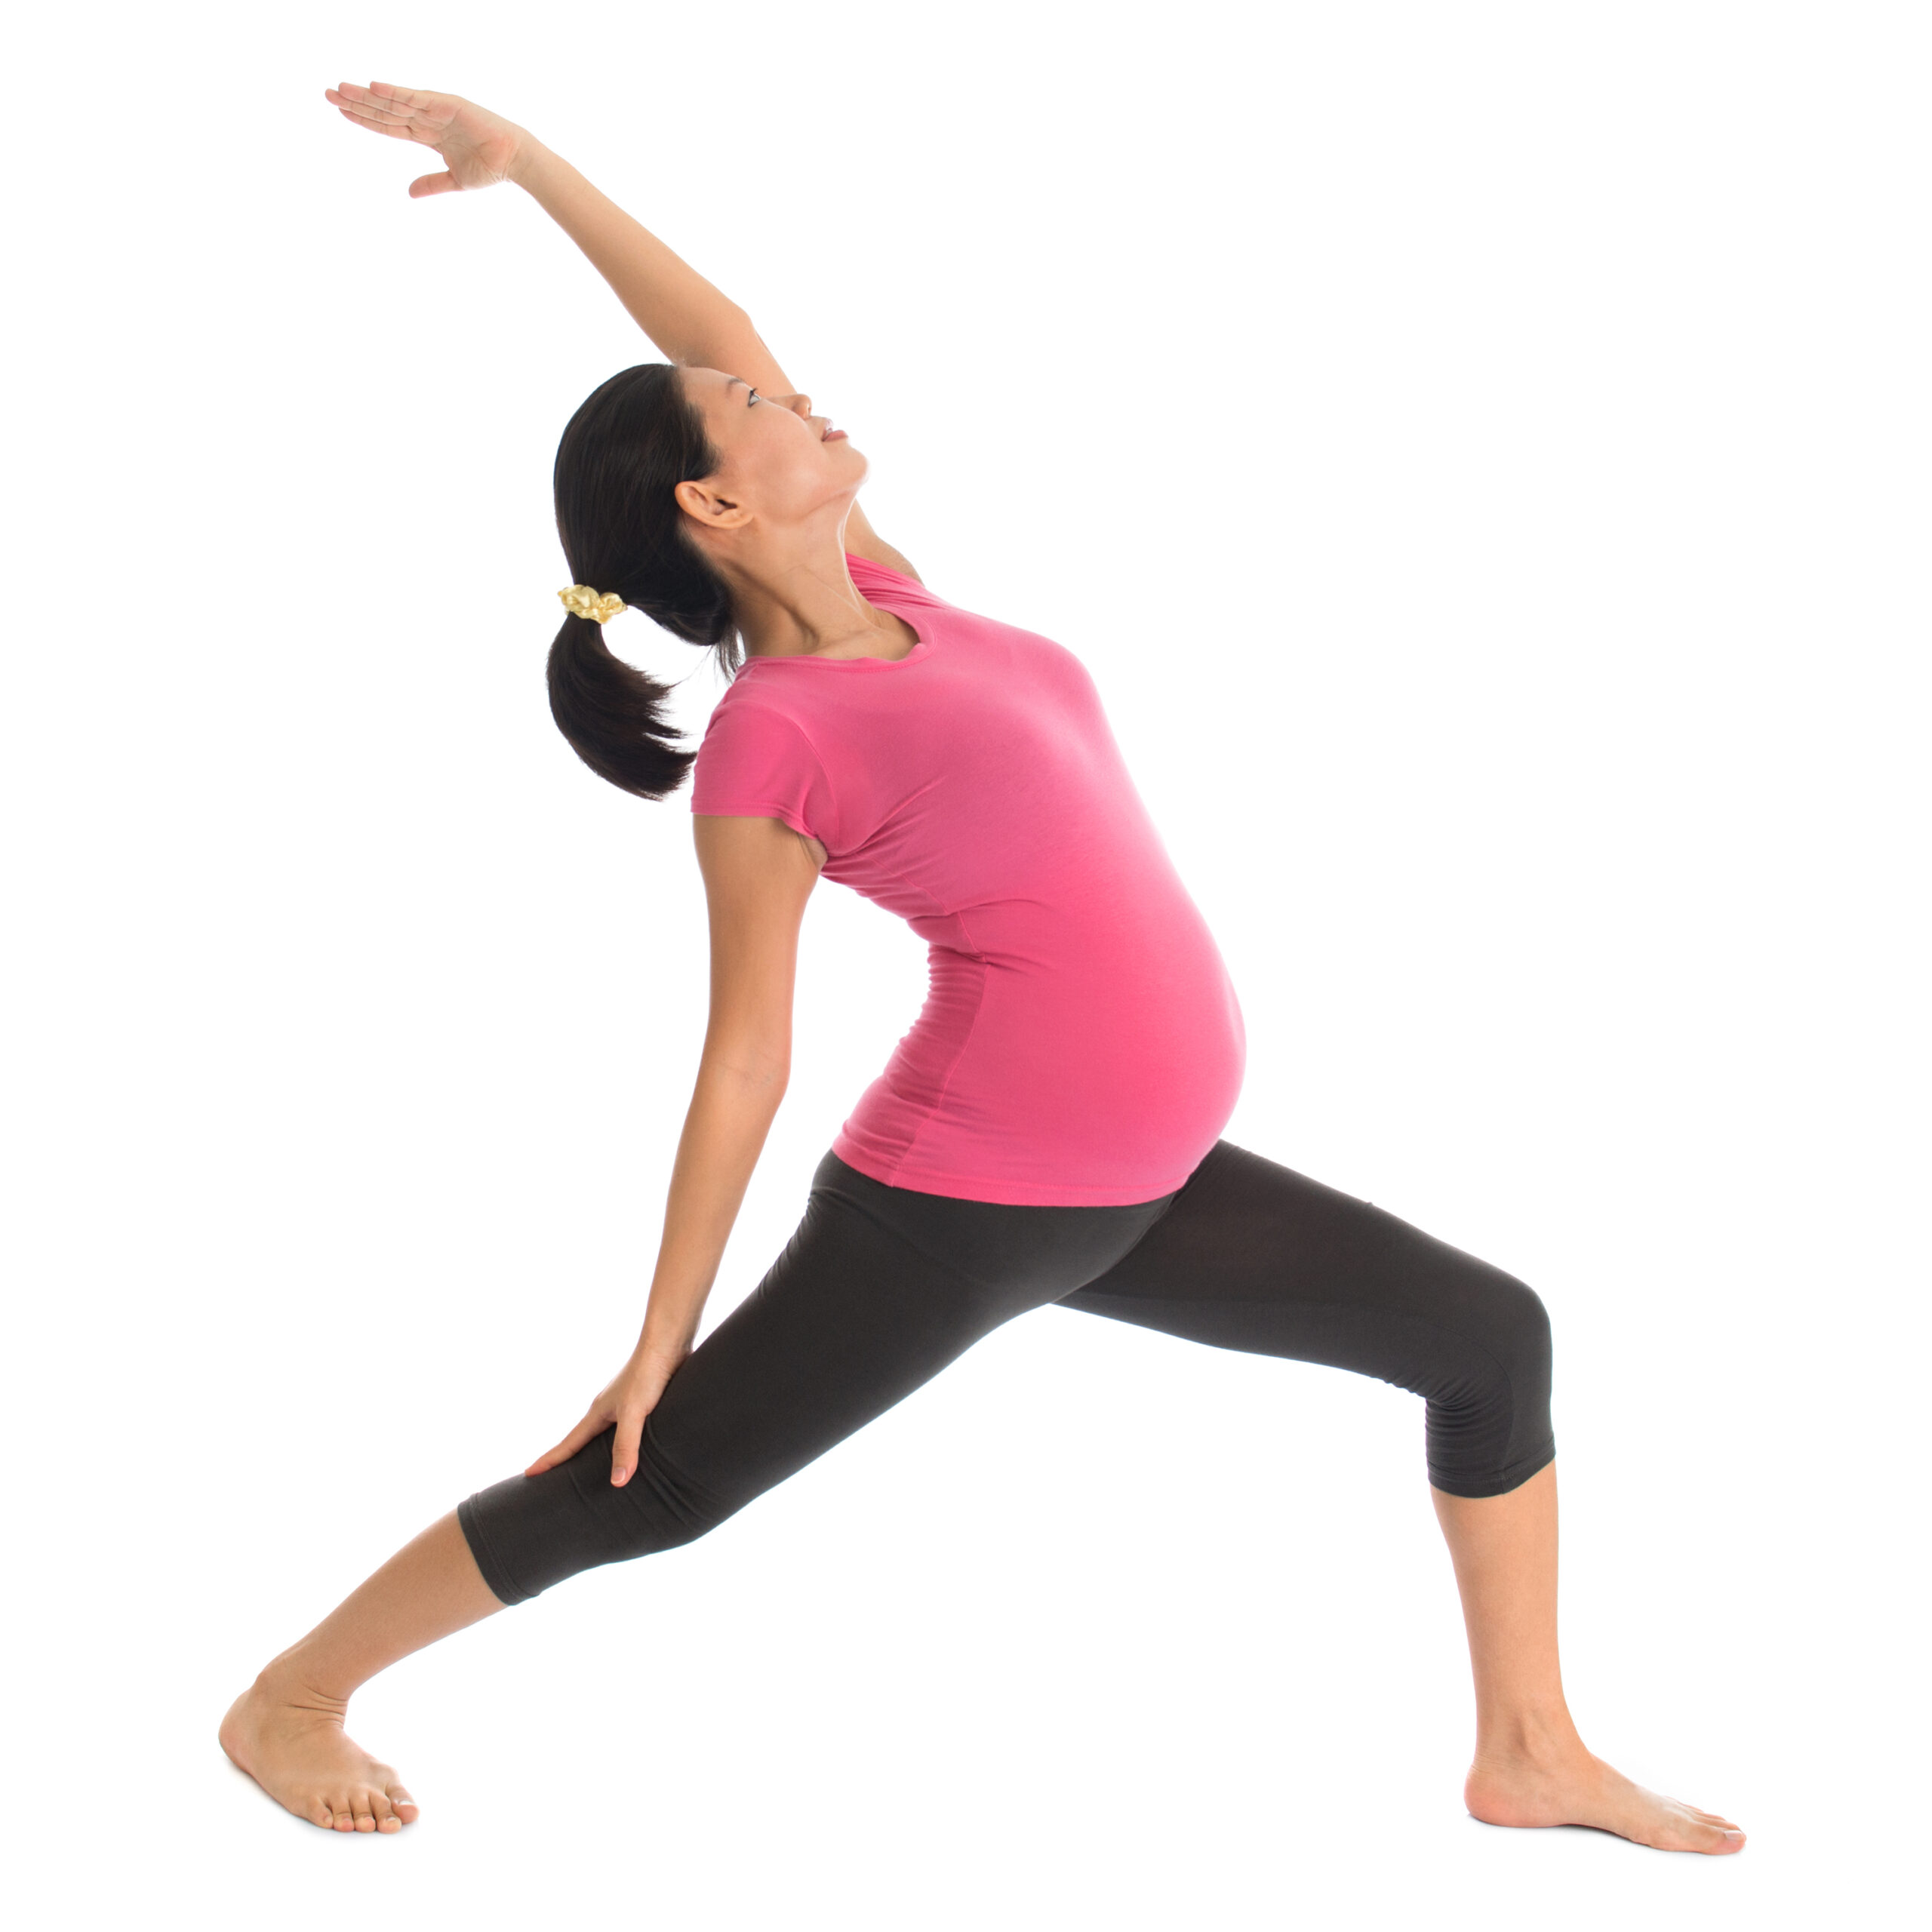 Postnatal Yogasanas: 5 Extraordinary Healing Poses To Recover After Delivery